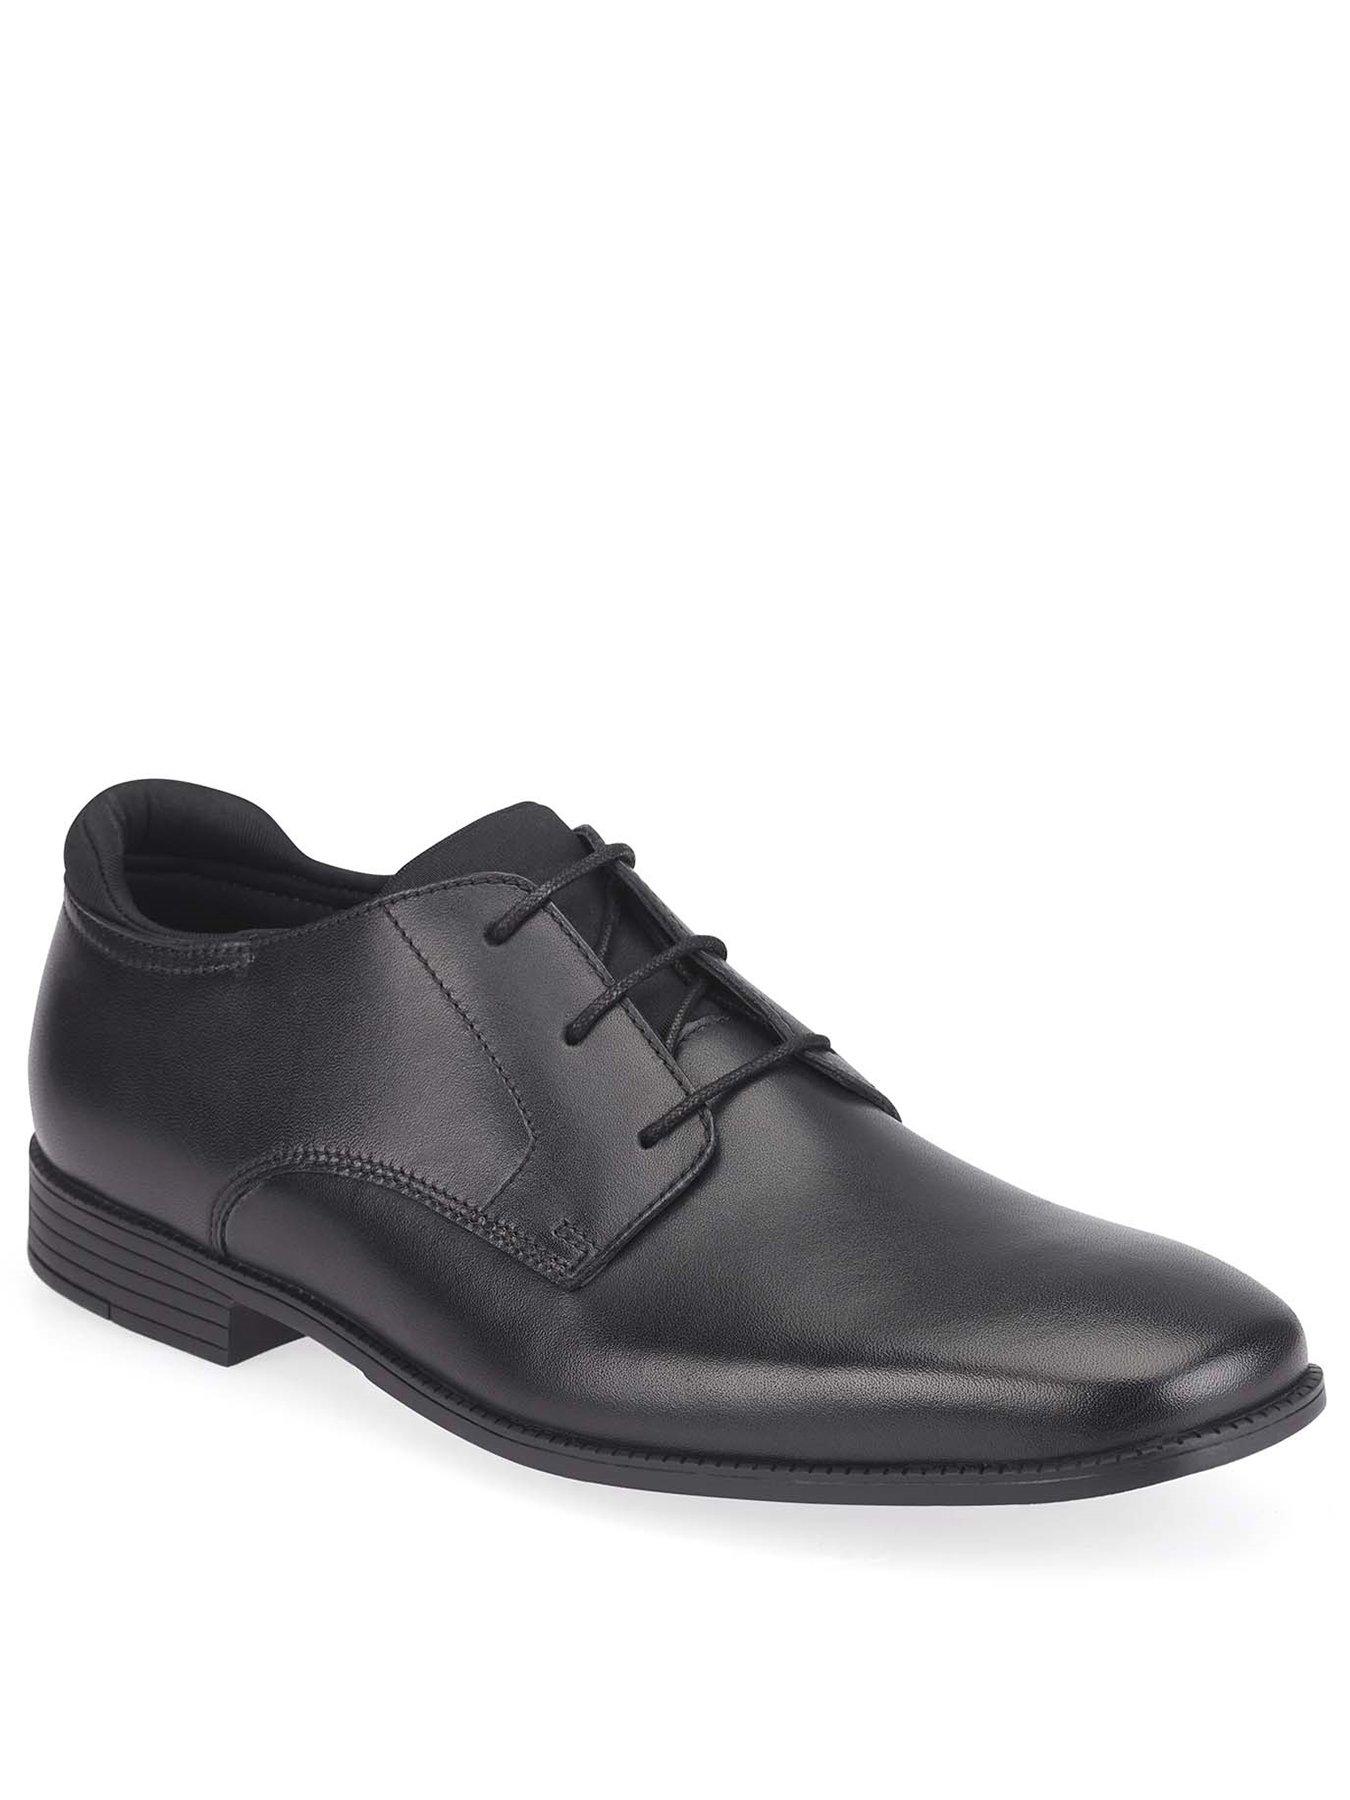  Boys Academy Lace Up School Shoes - Black Leather